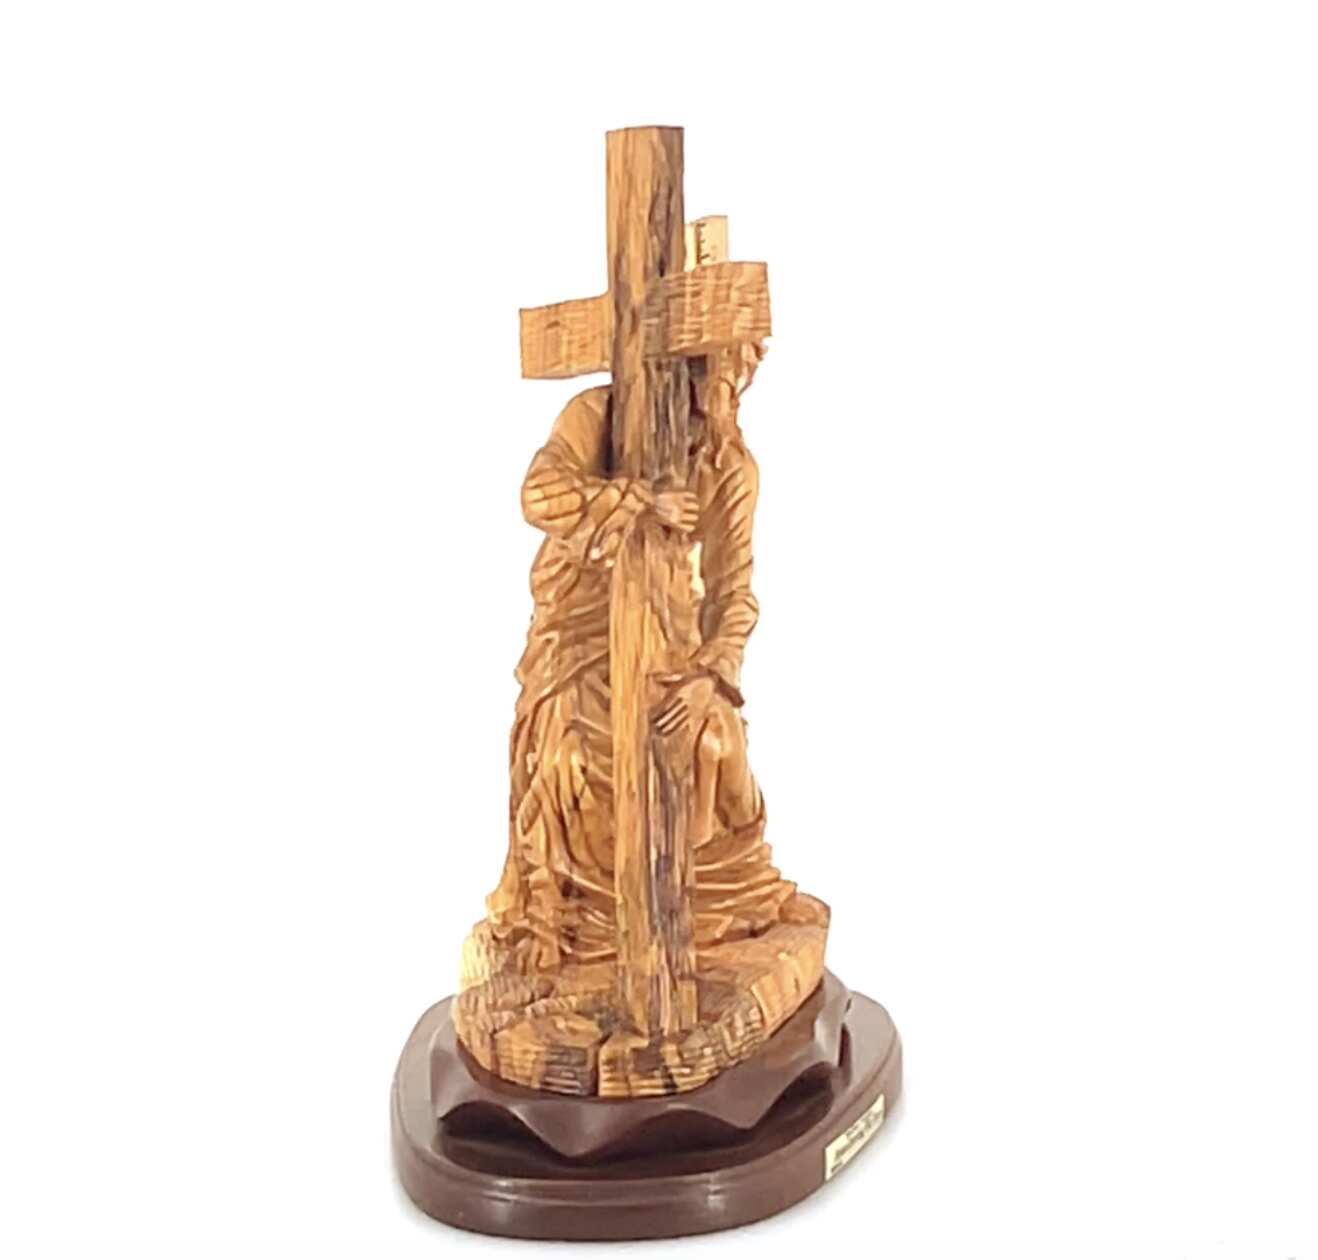 Jesus Christ Carrying Cross Statue, Wood Carving 15.7"